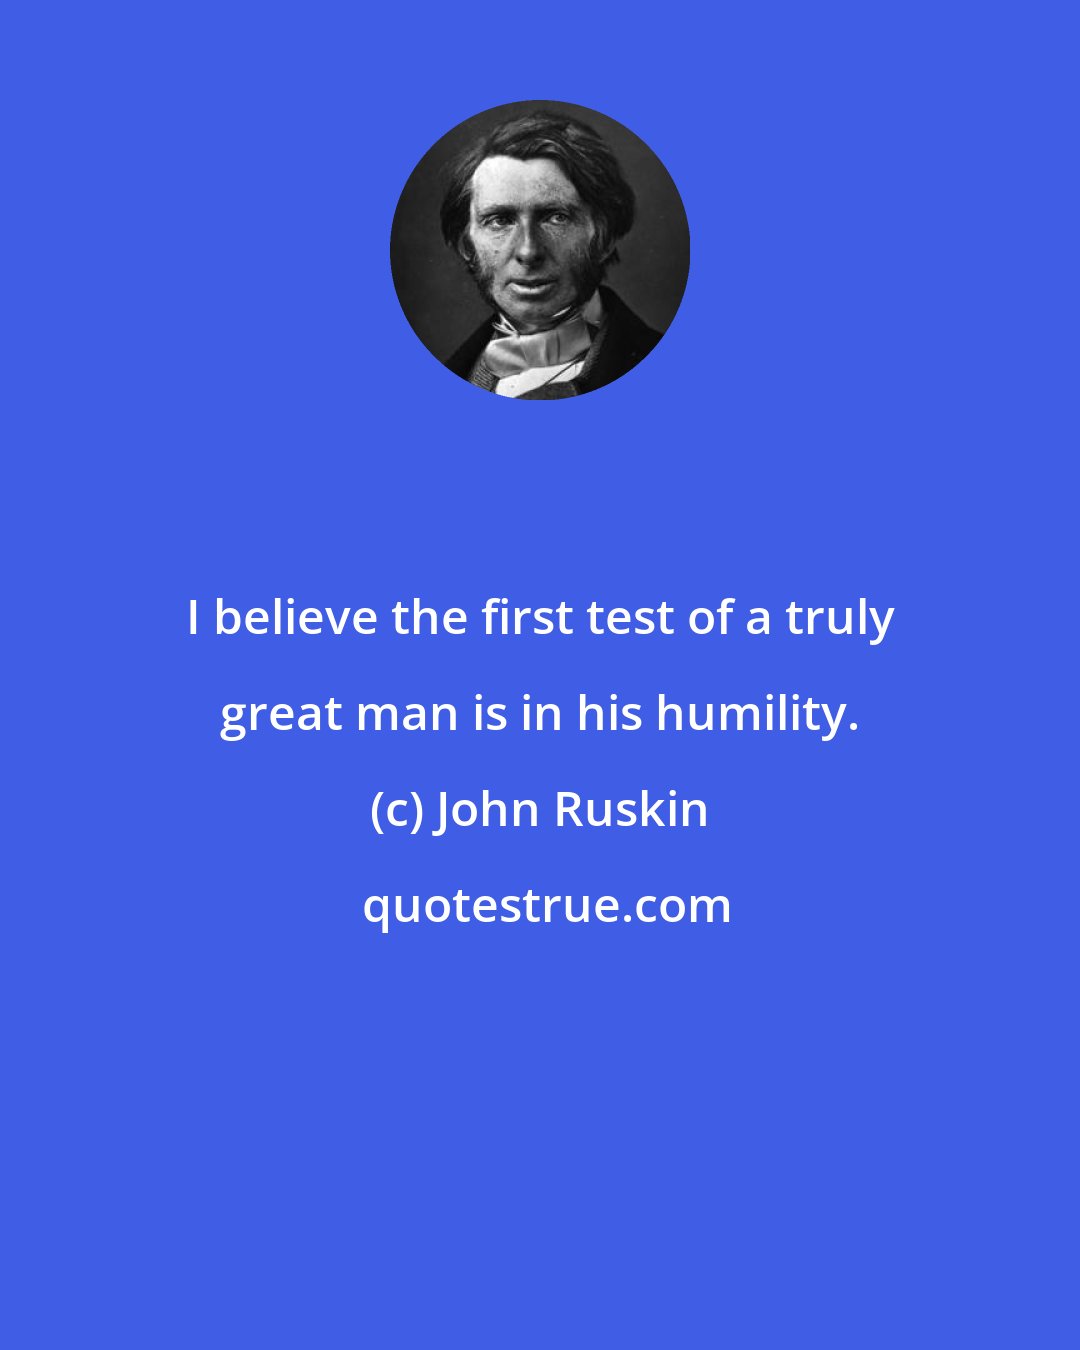 John Ruskin: I believe the first test of a truly great man is in his humility.